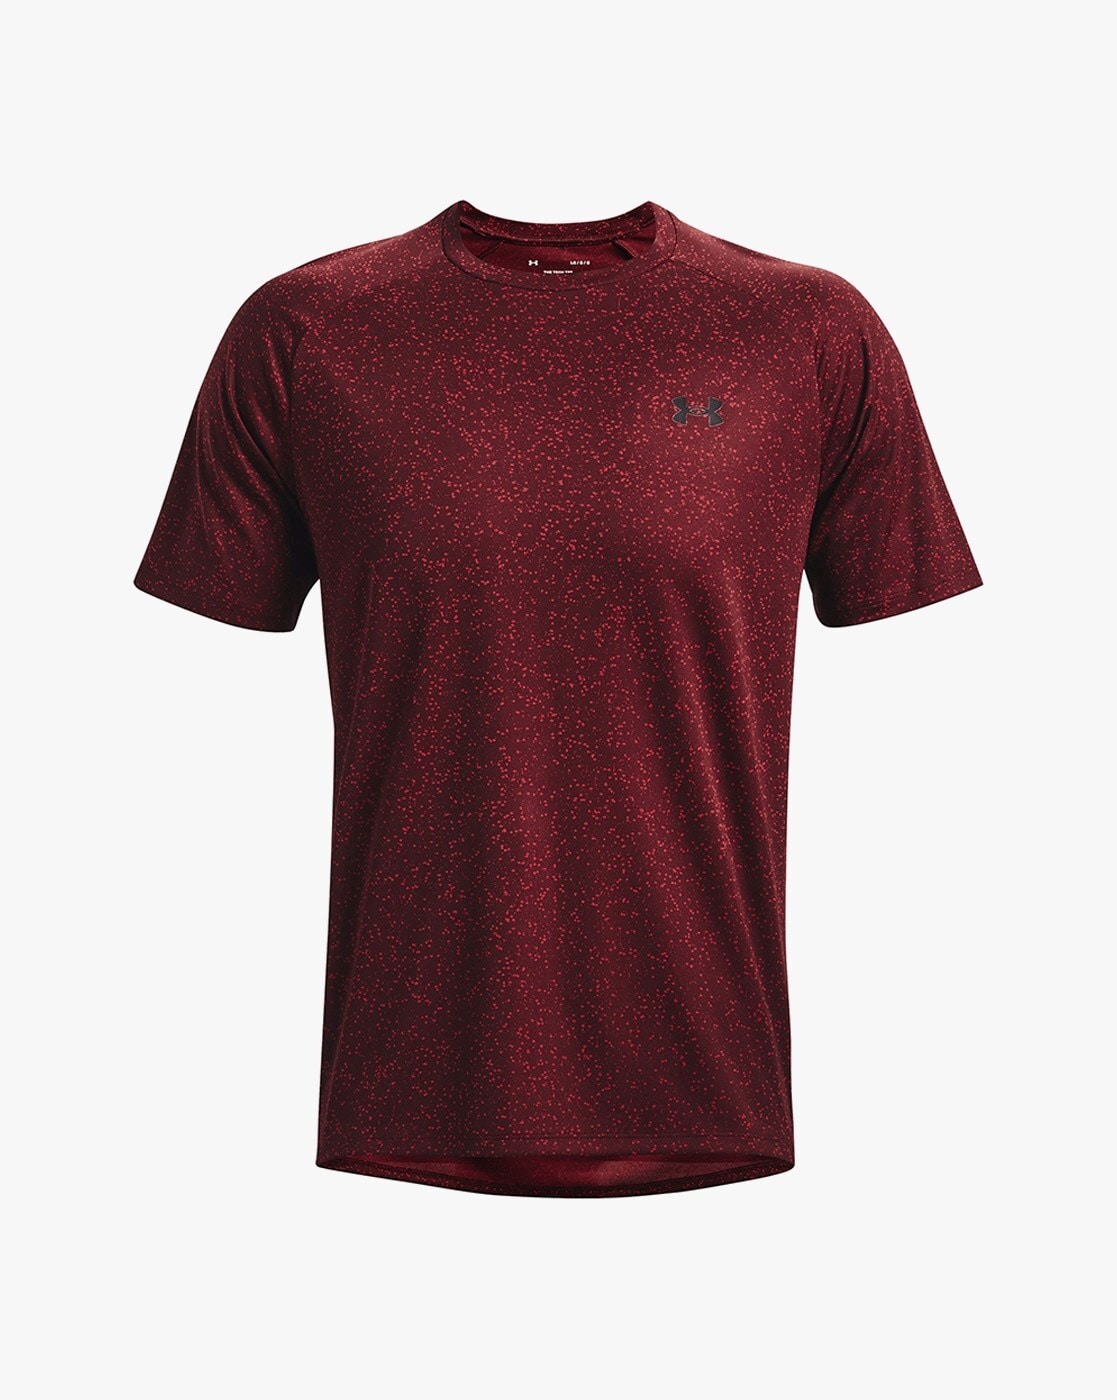 Buy Red Tshirts for Men by Under Armour Online